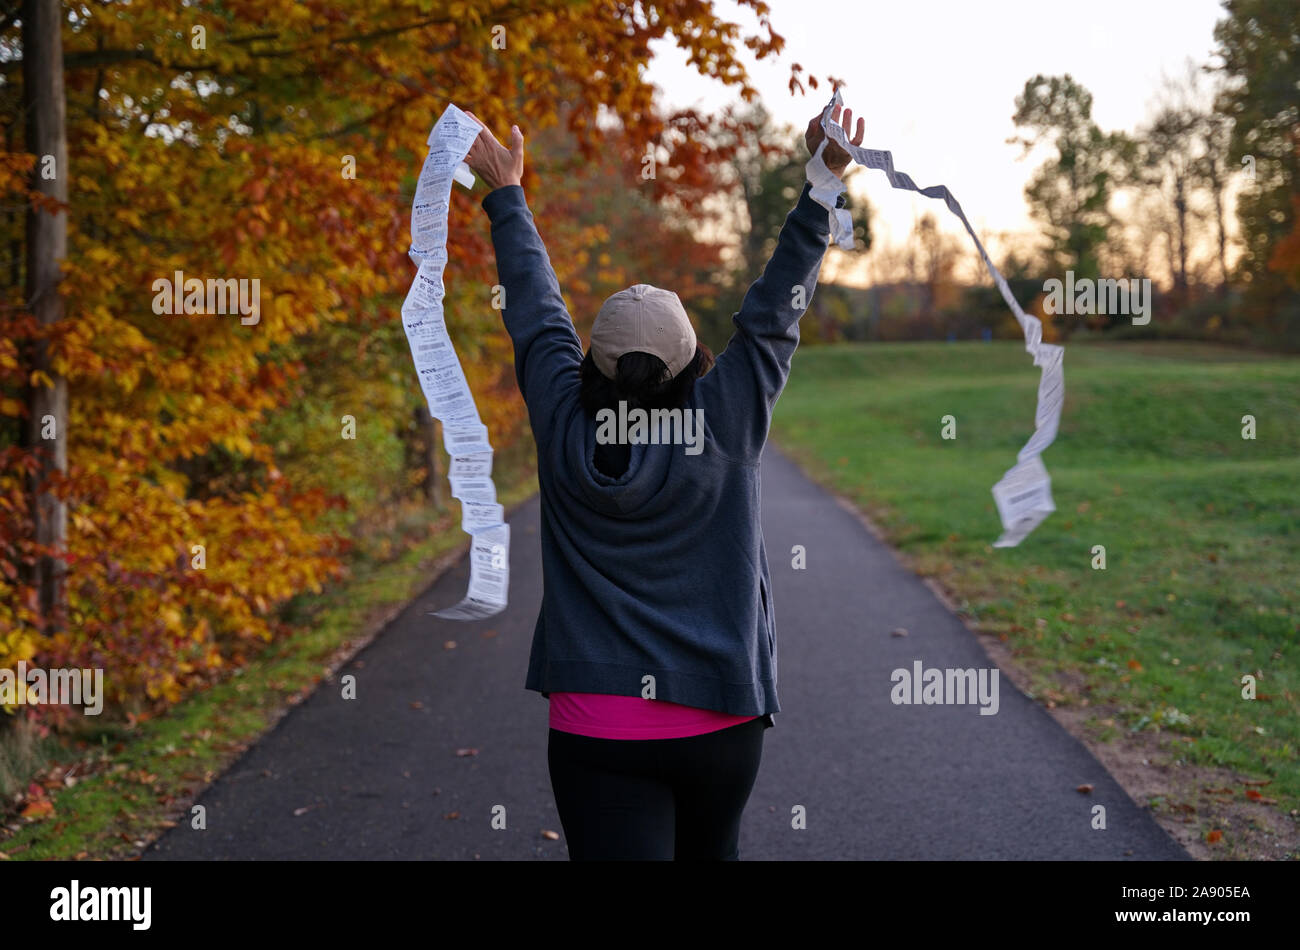 Middletown, CT USA. Oct 2019. Woman rushing from an autumn park waving discount coupons to be used at a local pharmacy store. Stock Photo